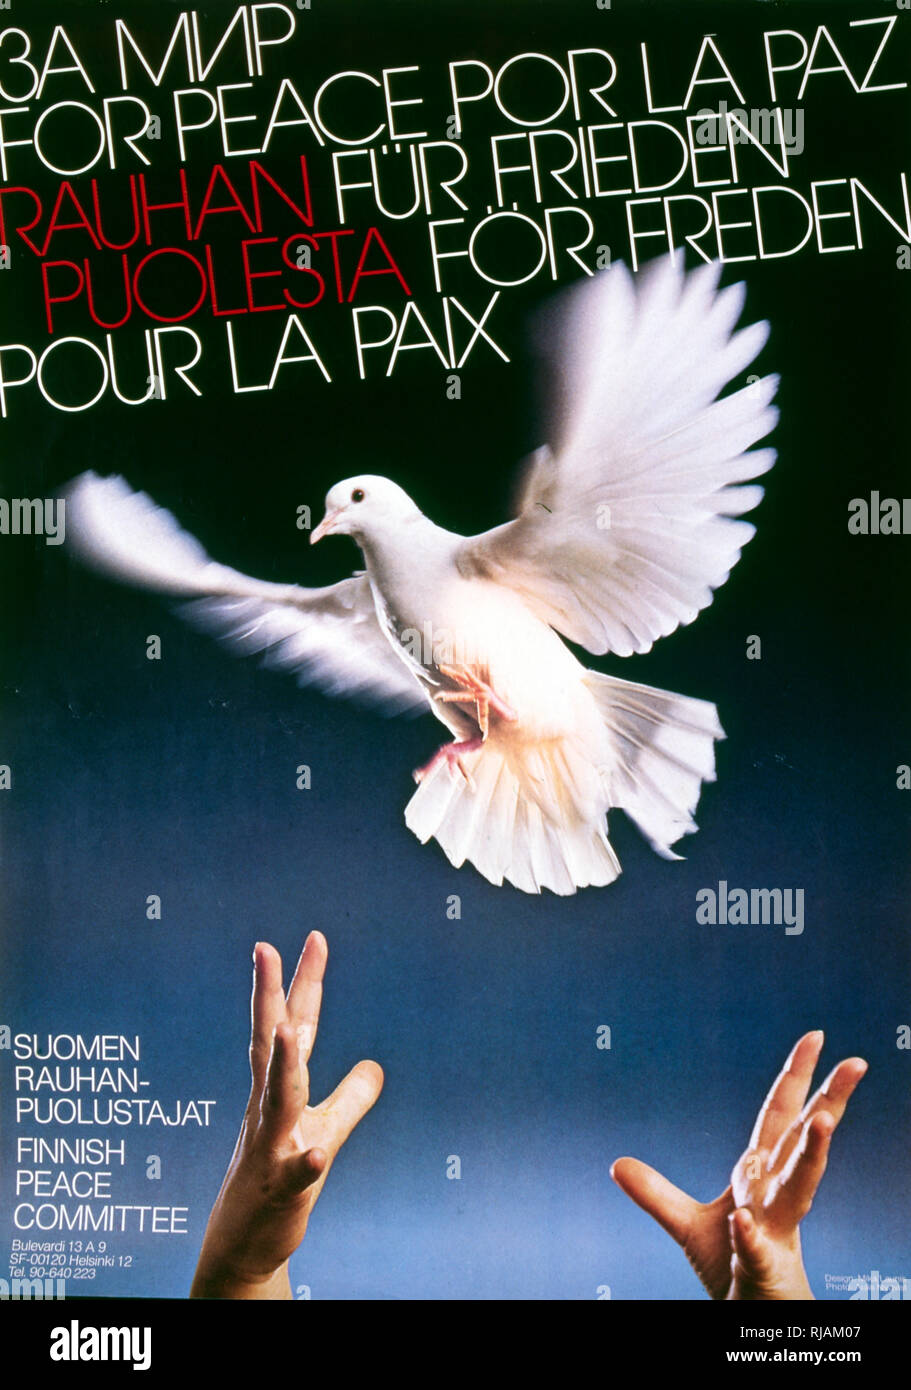 Finnish Peace Committee, anti-nuclear war, poster, 1983. Stock Photo